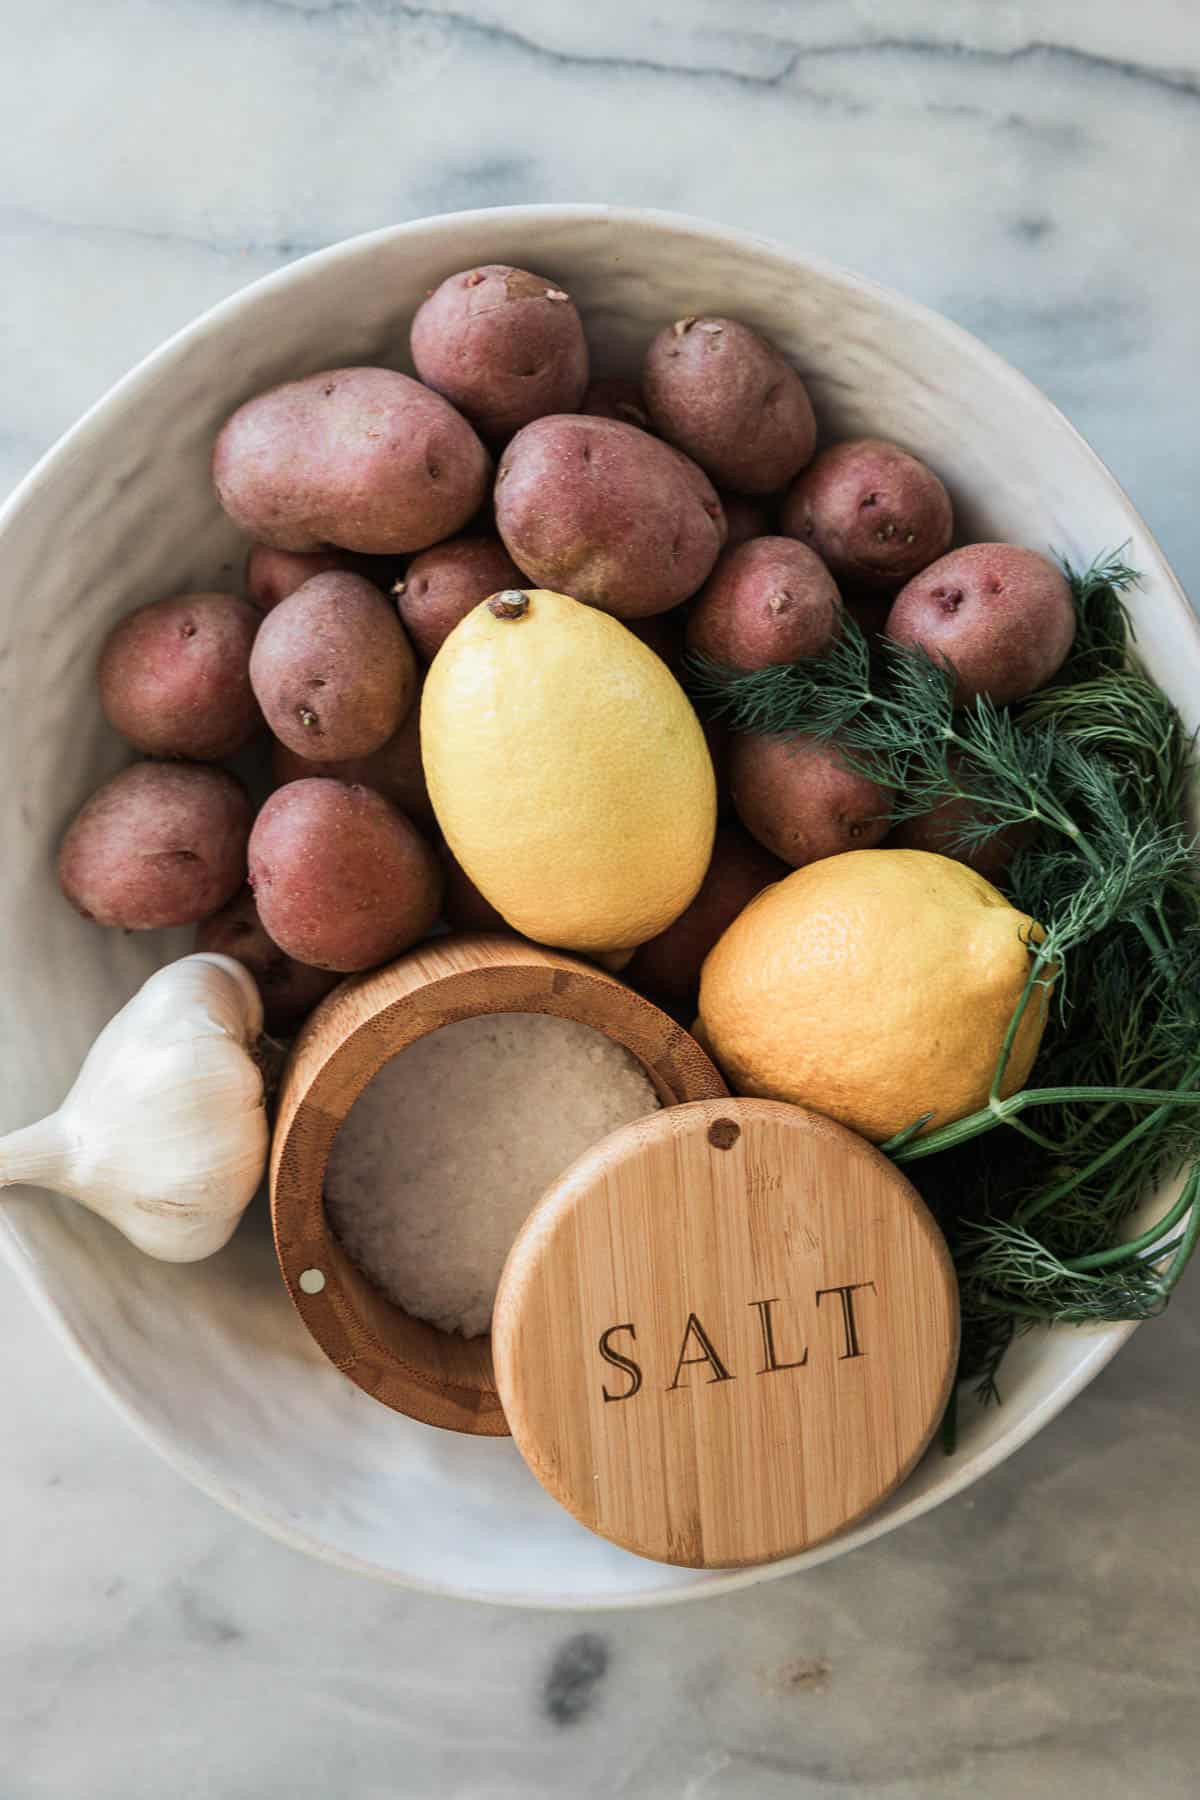 Red potatoes, lemon, dill, garlic, and salt in a white bowl.